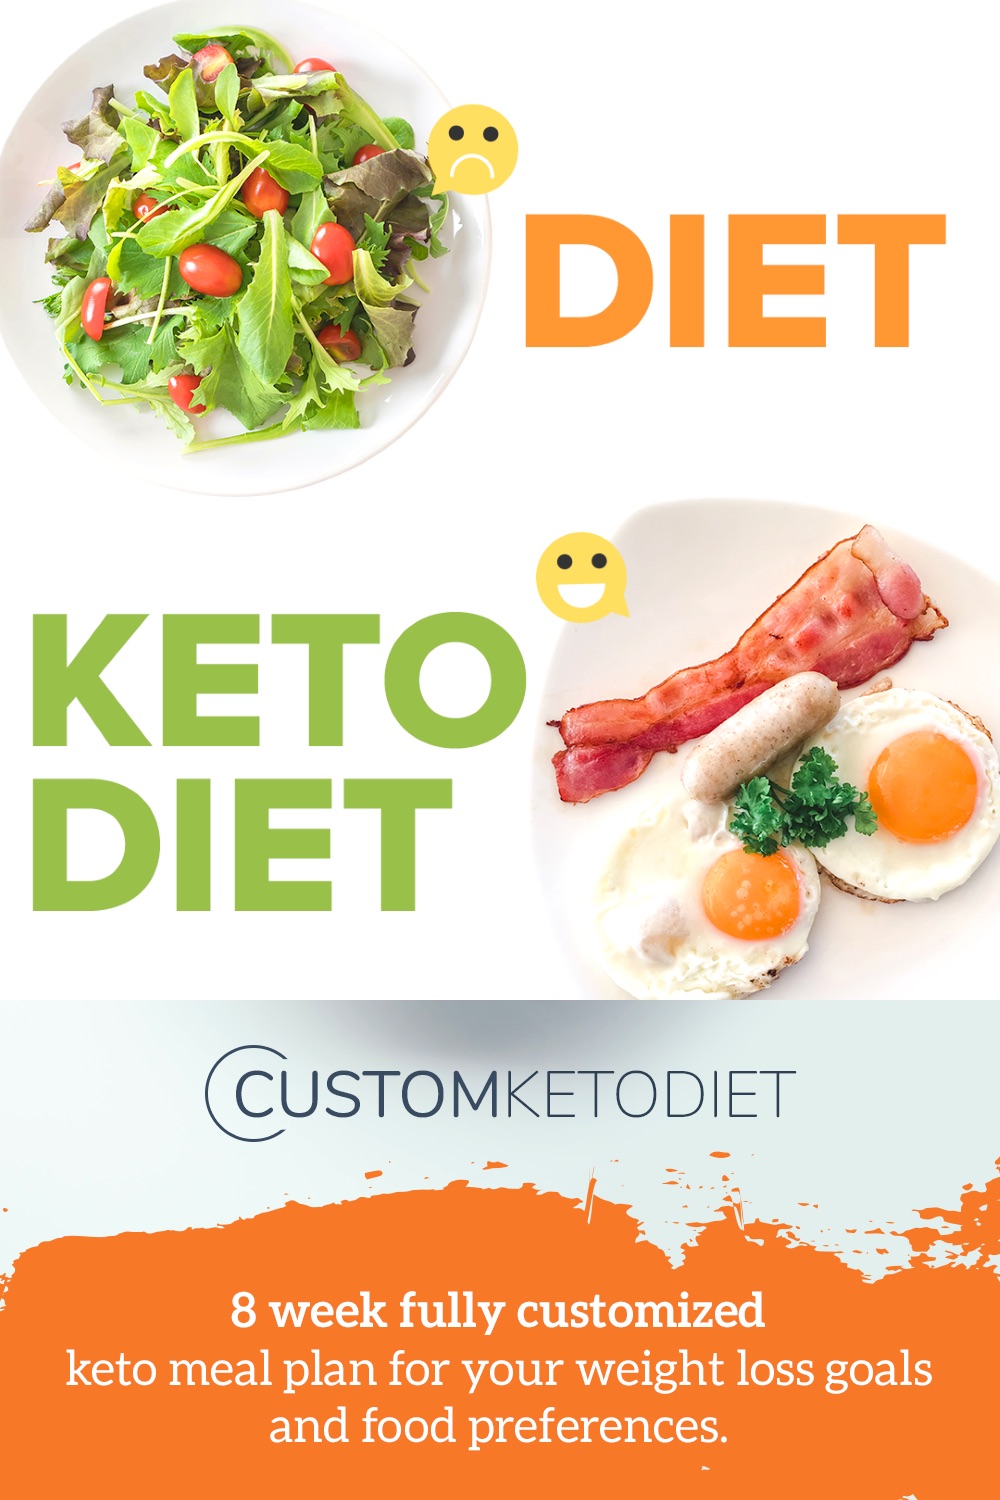 how to pay for custom keto diet plan